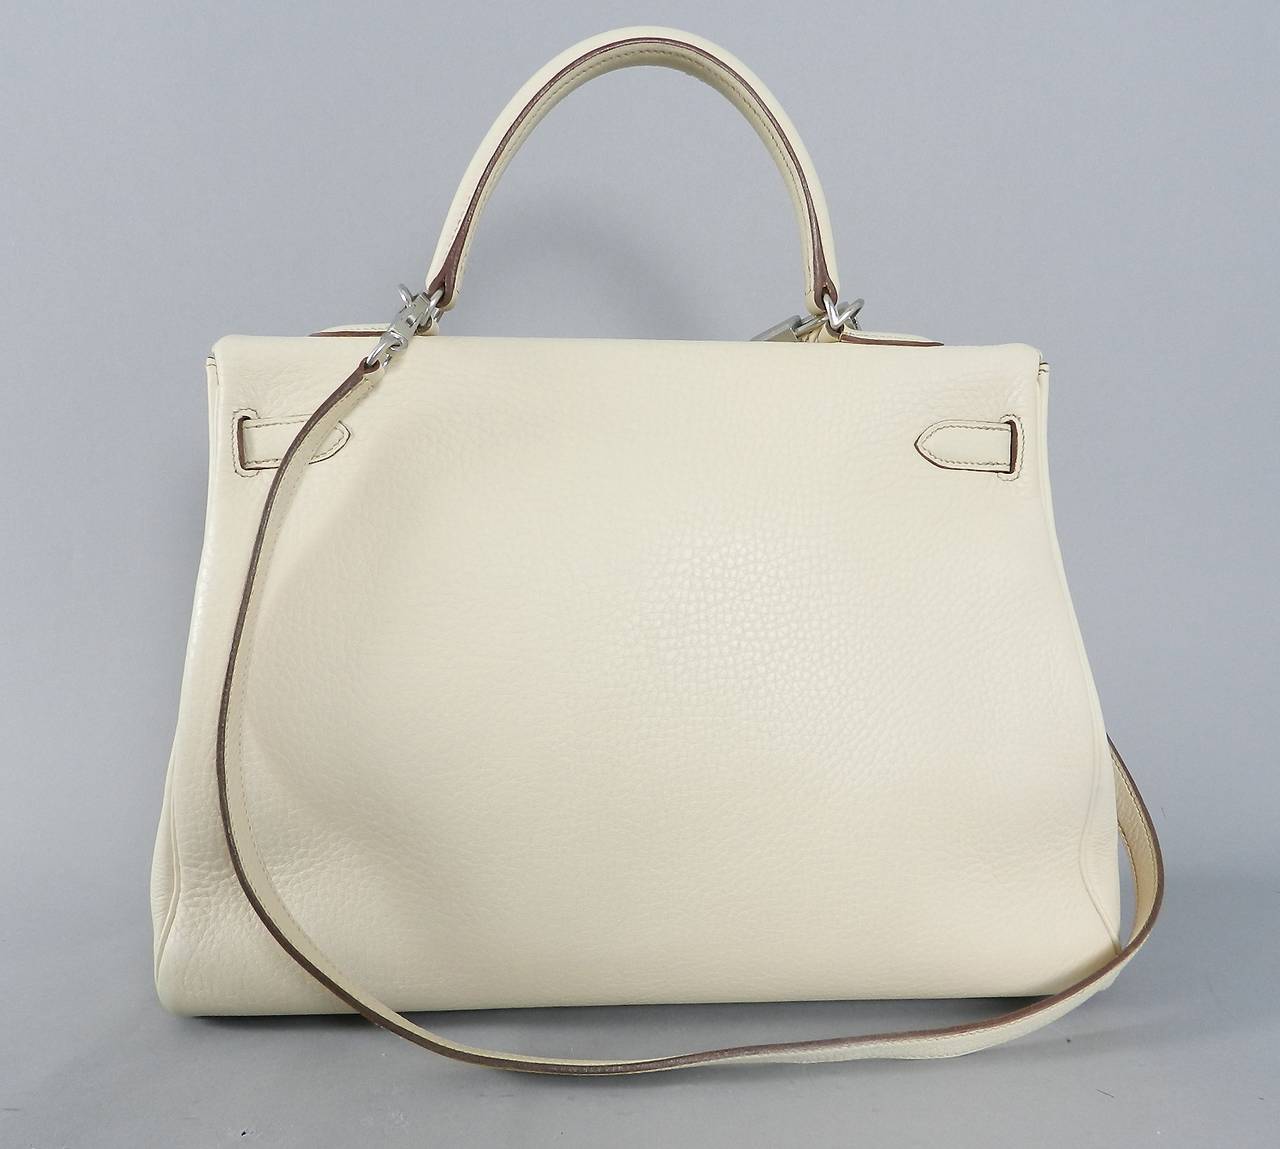 Hermes Kelly 35 blanc casse color with brushed palladium hardware. This bag just came back from Hermes spa and is in excellent previously owned condition with no outstanding flaws to note. The metal hardware still has plastic cover on it from being